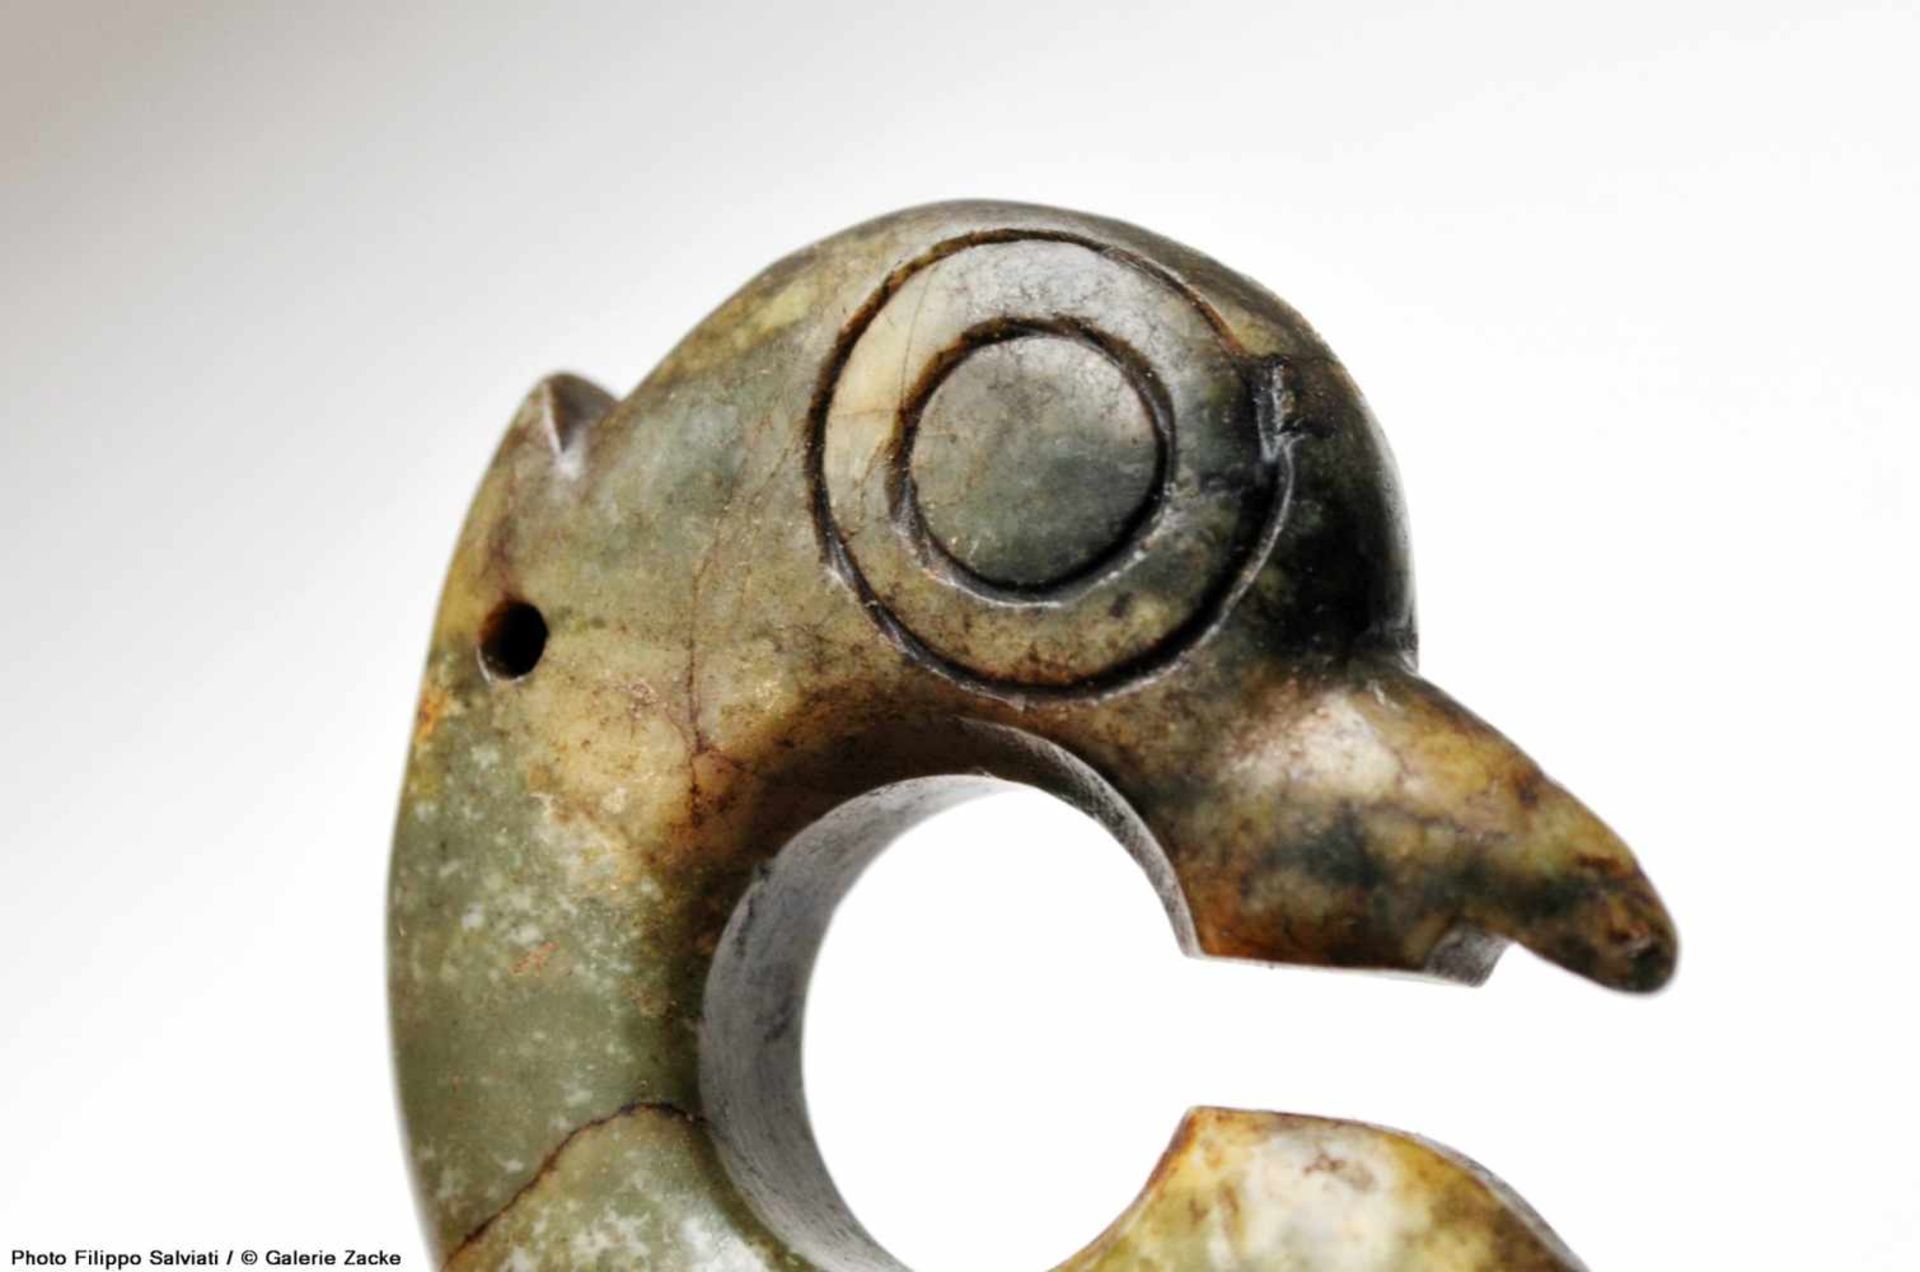 A VERY RARE HONGSHAN CARVING OF A BIRD-LIKE CREATURE Jade. China, Late Neolithic period, Hongshan - Image 10 of 14